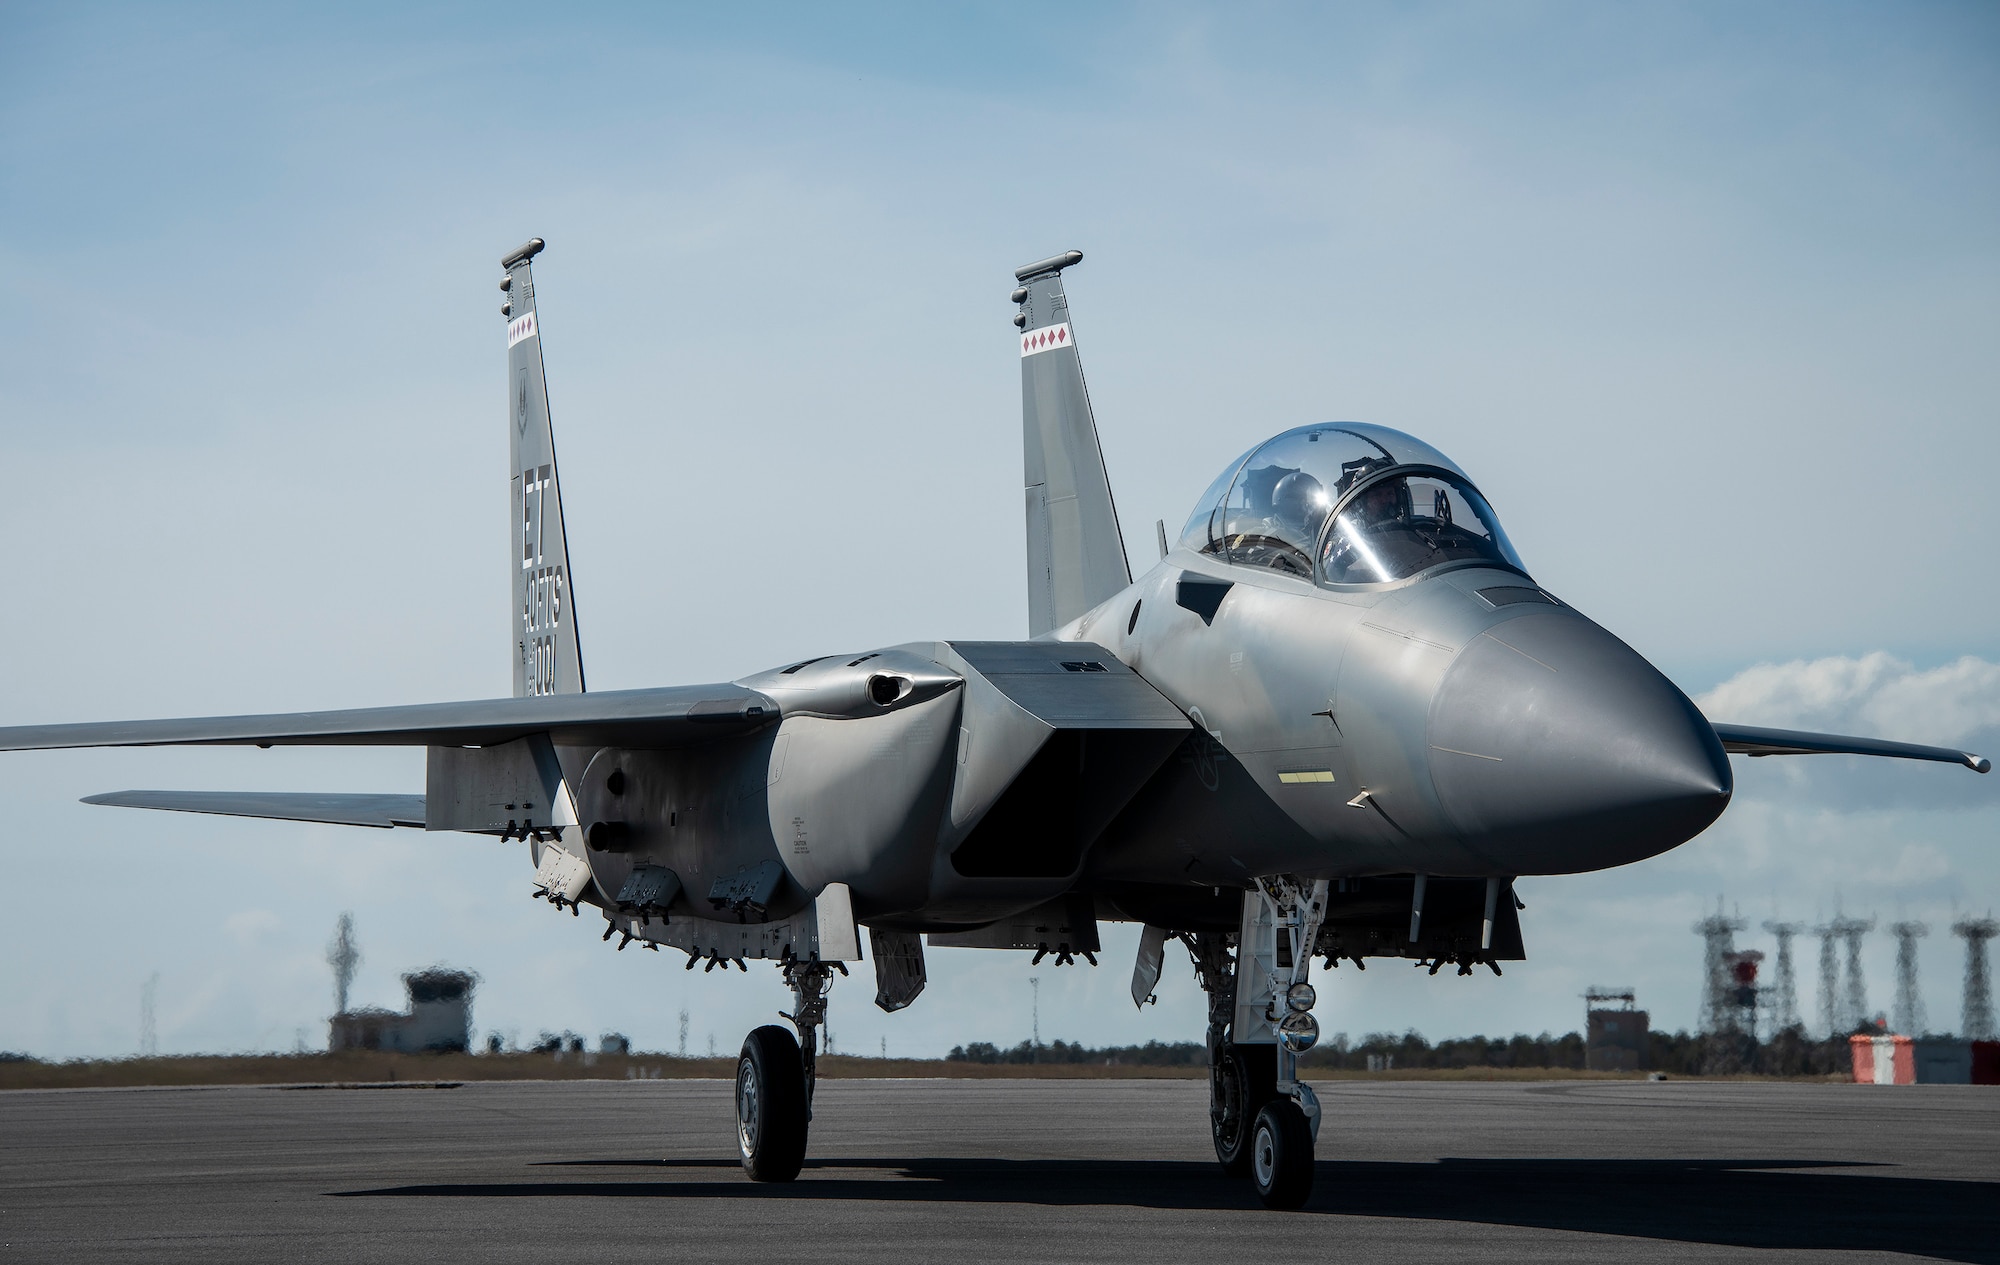 The F-15EX, the Air Force’s newest fighter aircraft, arrives at Eglin Air Force Base, Fla., March 11, 2021. The aircraft will be the first Air Force aircraft to be tested and fielded from beginning to end through combined developmental and operational tests. The 40th Flight Test Squadron and the 85th Test and Evaluation Squadron personnel are responsible for testing the aircraft. (U.S. Air Force photo by Ilka Cole)